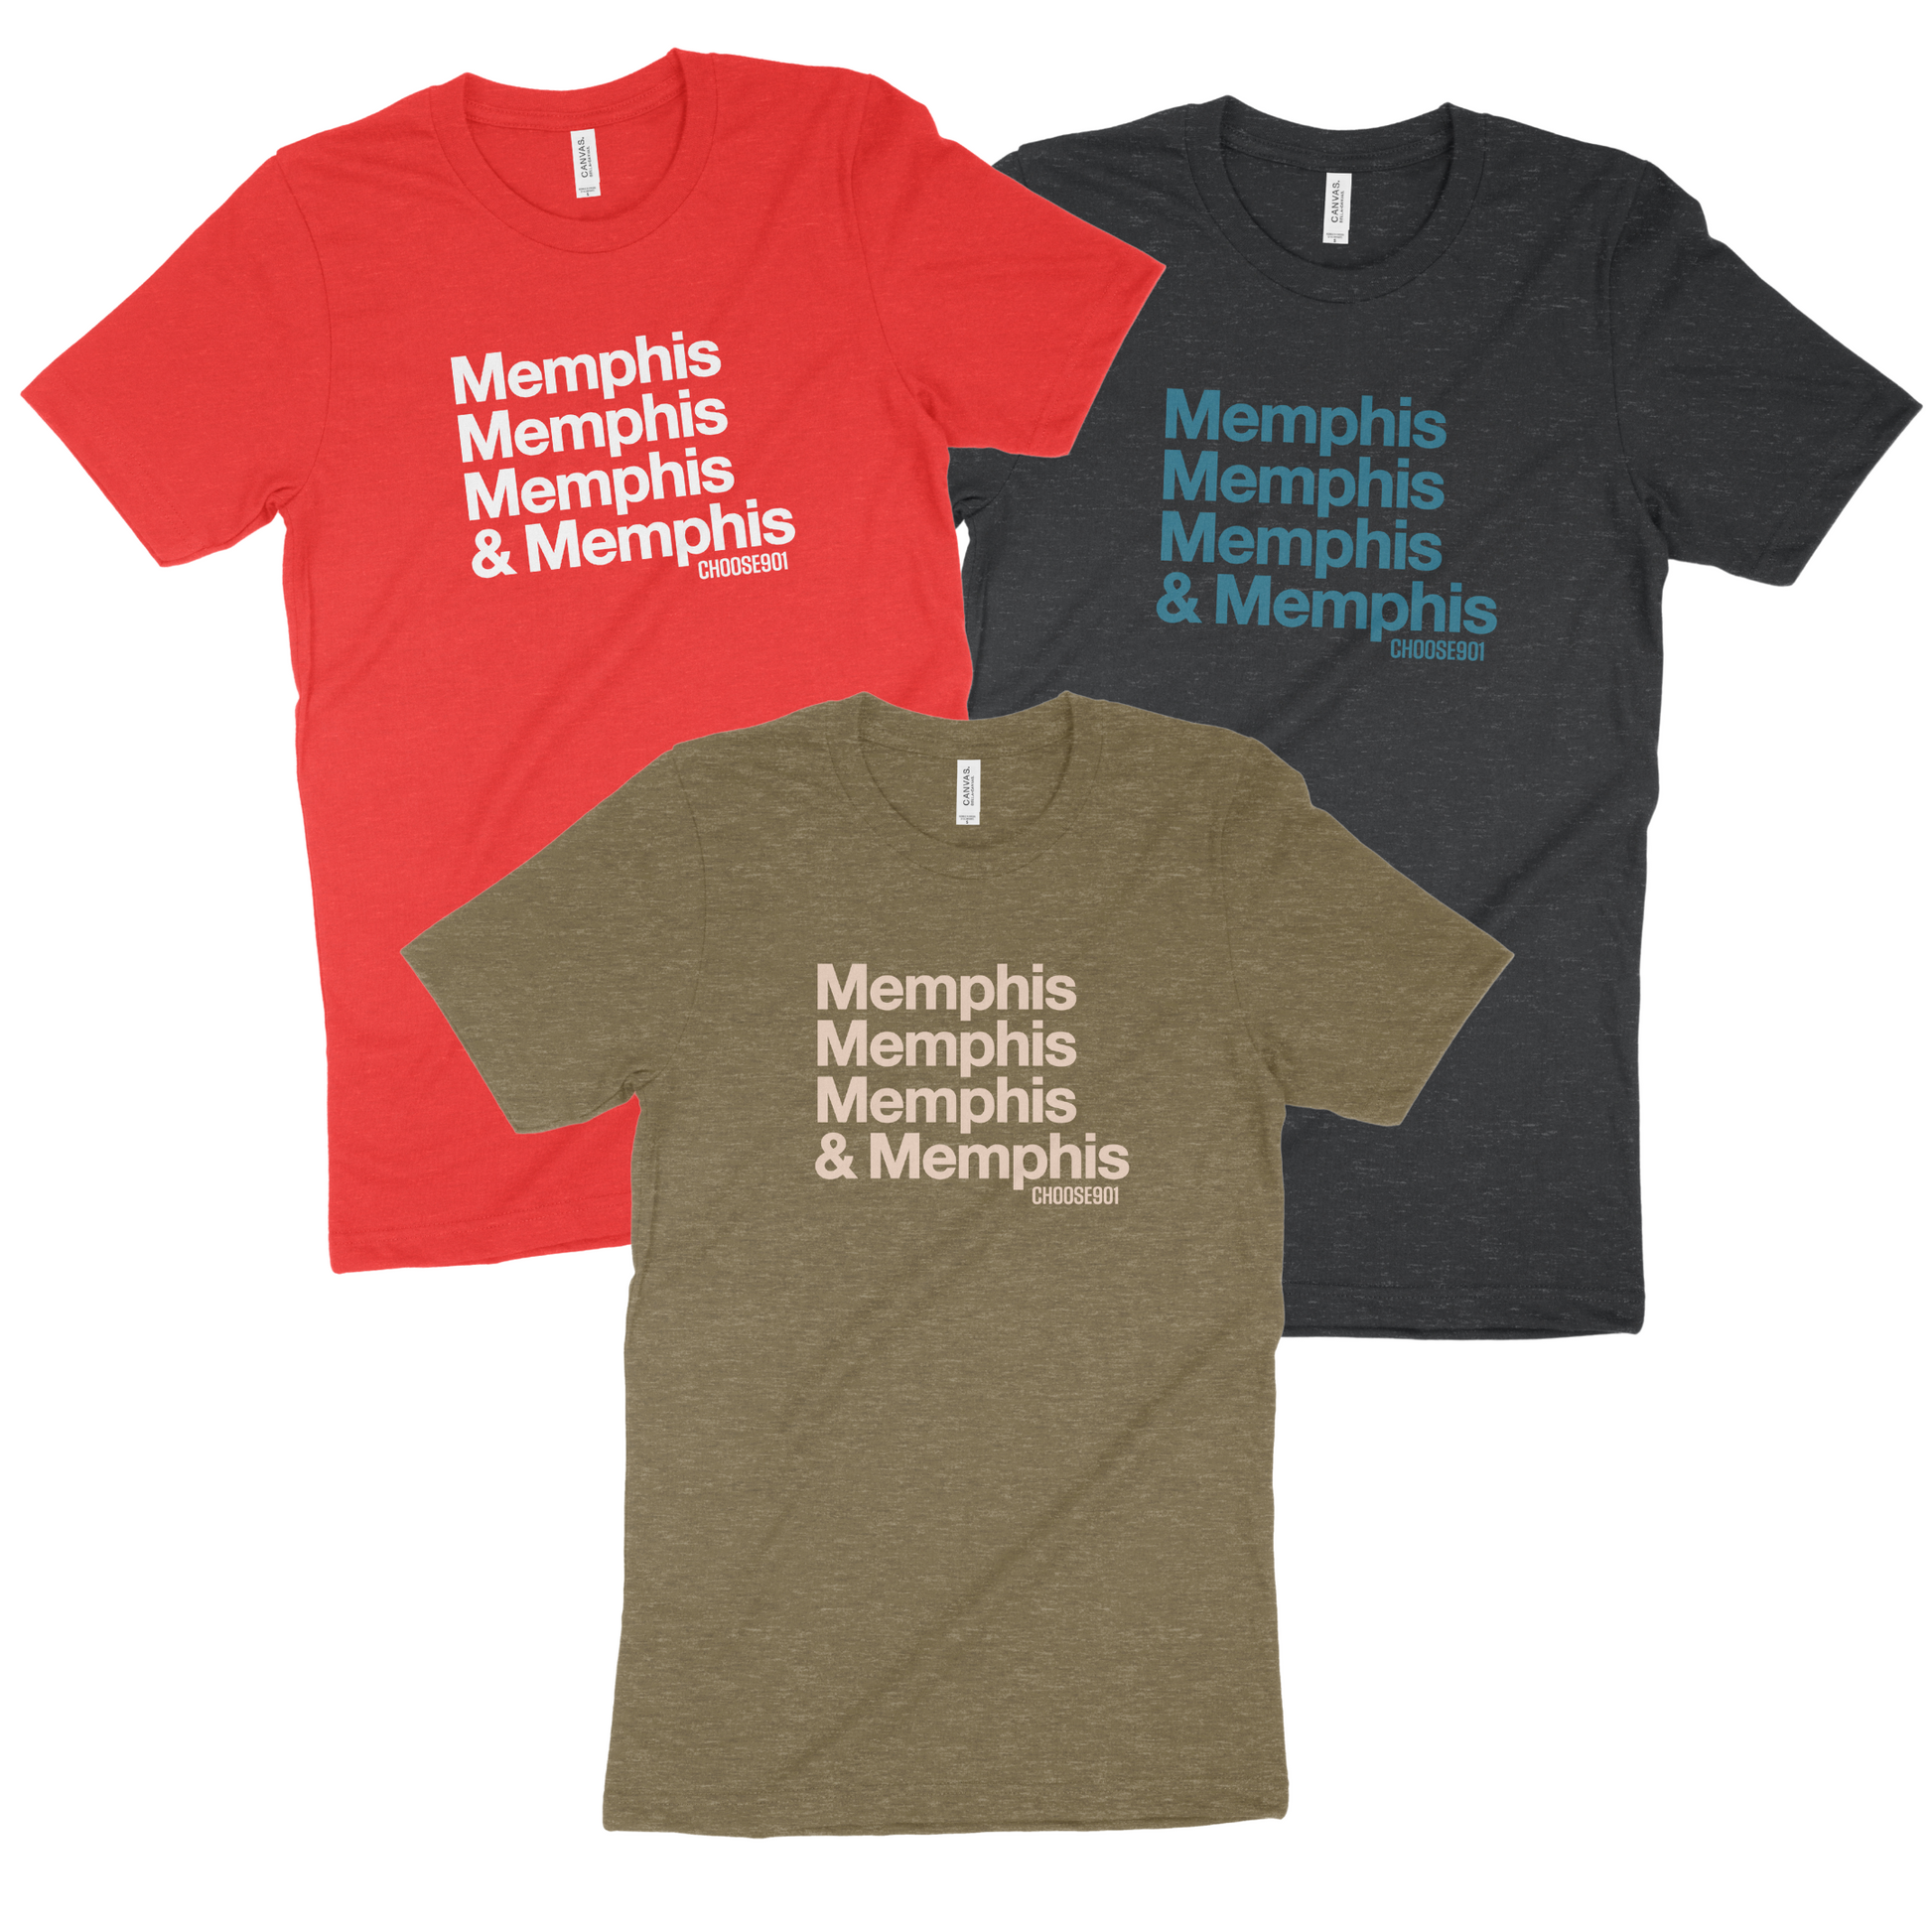 Three Choose901 & Memphis Tees in red, blue, and gray, each with the word "Choose901" printed repeatedly in a pattern. (Brand Name: Choose901 Merch Shop)